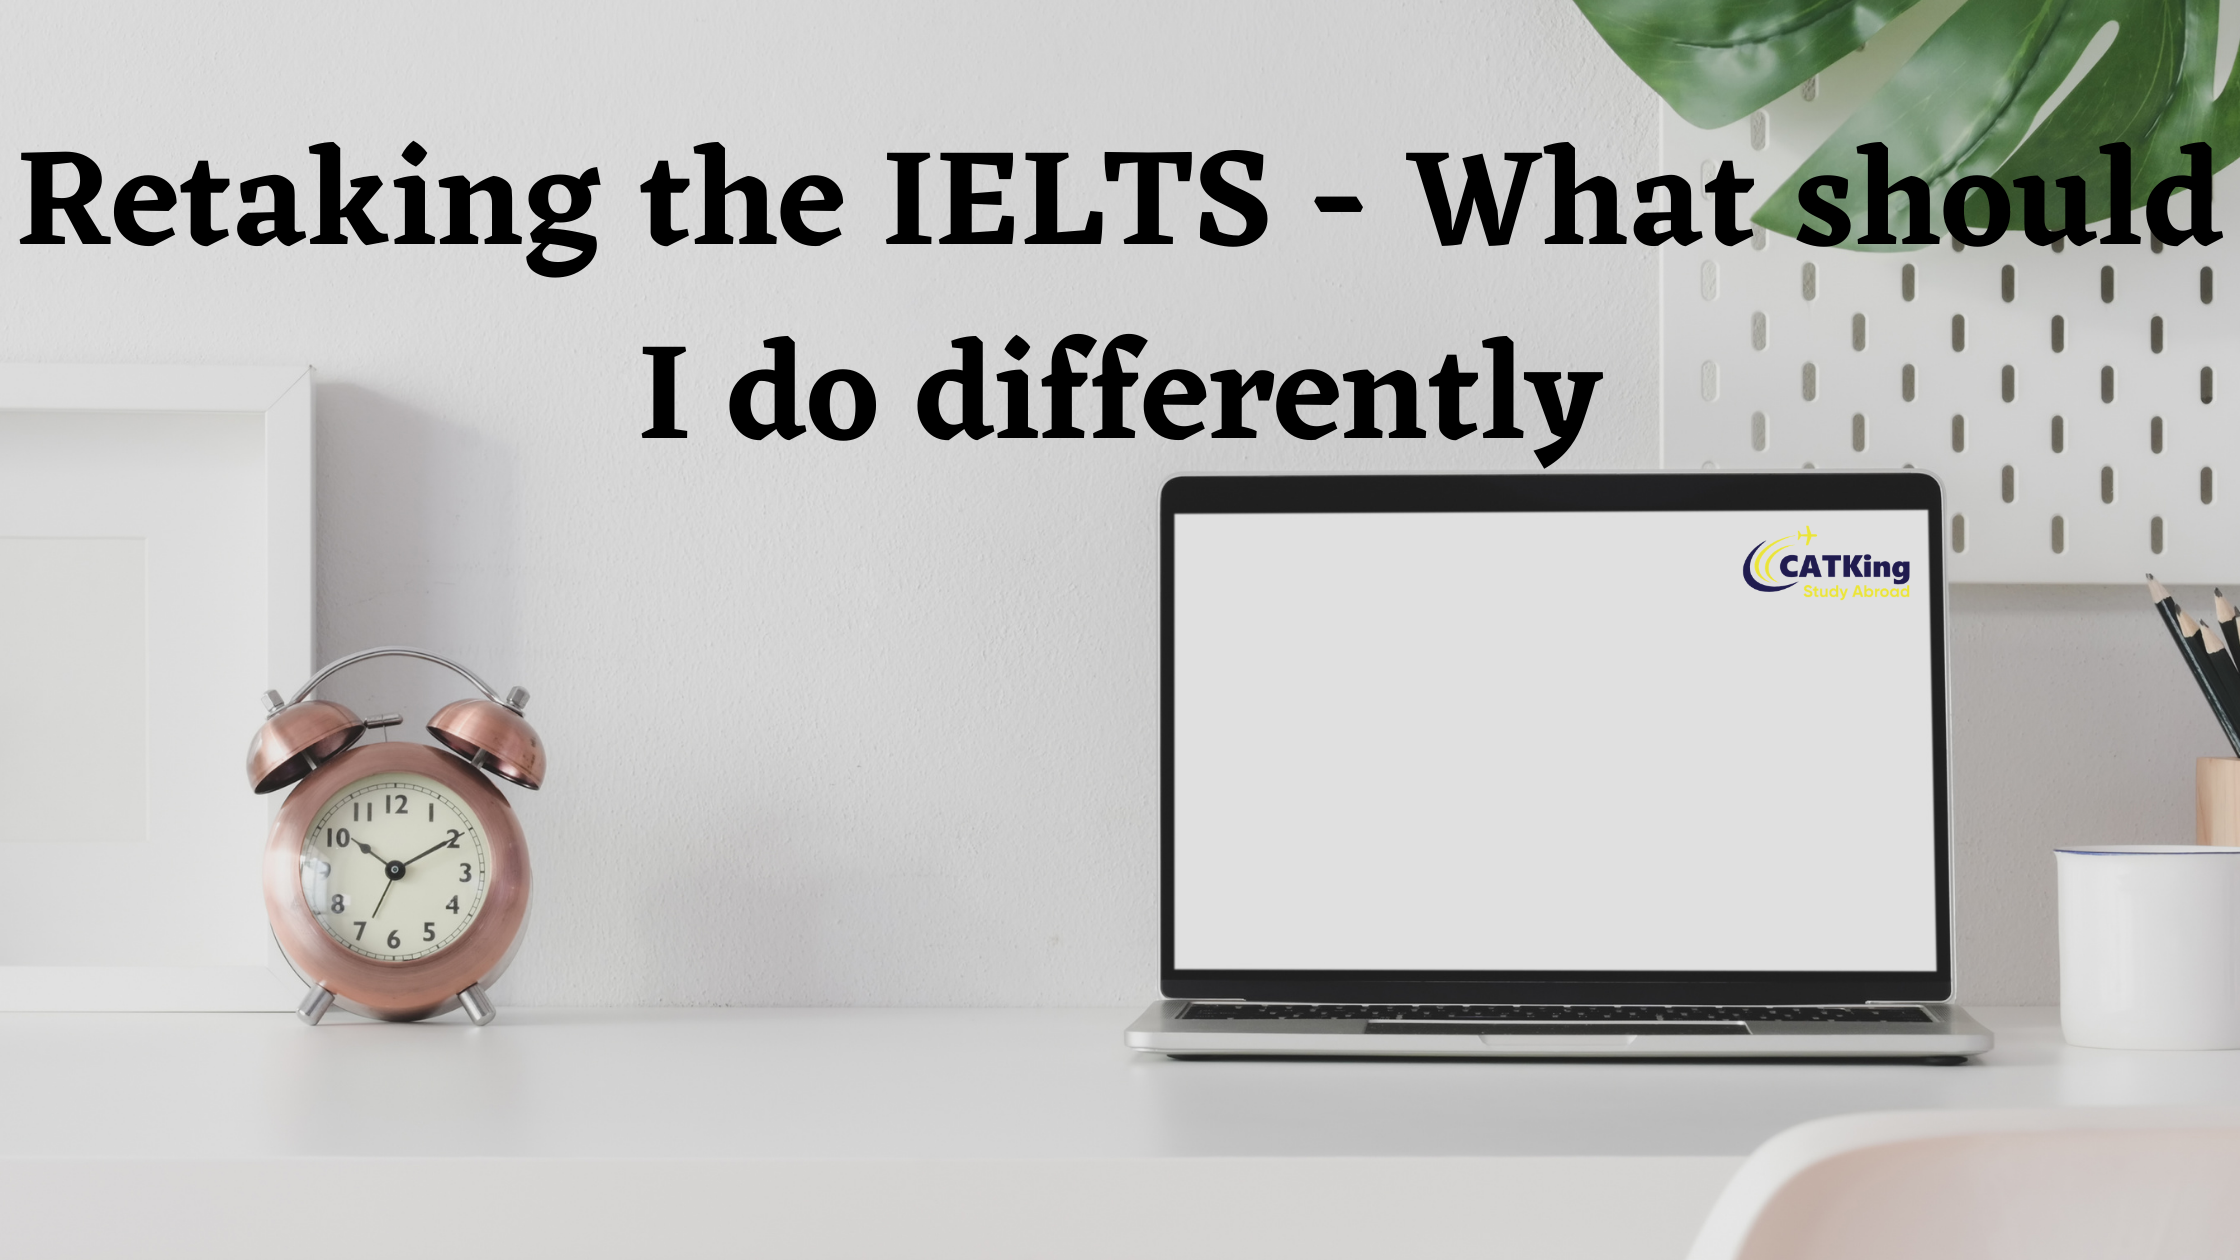 Retaking the IELTS - What should I do differently